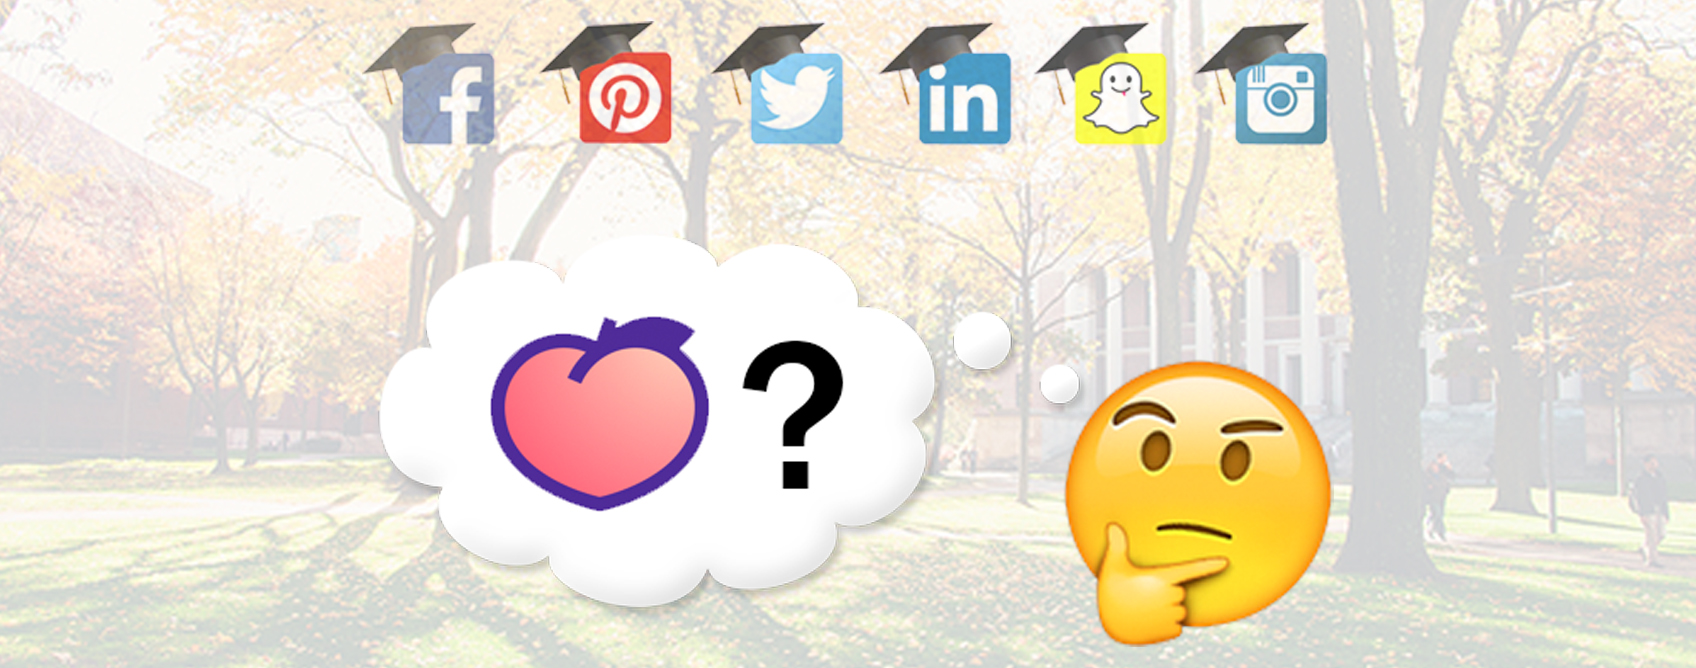 Should Colleges and Universities Jump on Social Media Bandwagons?